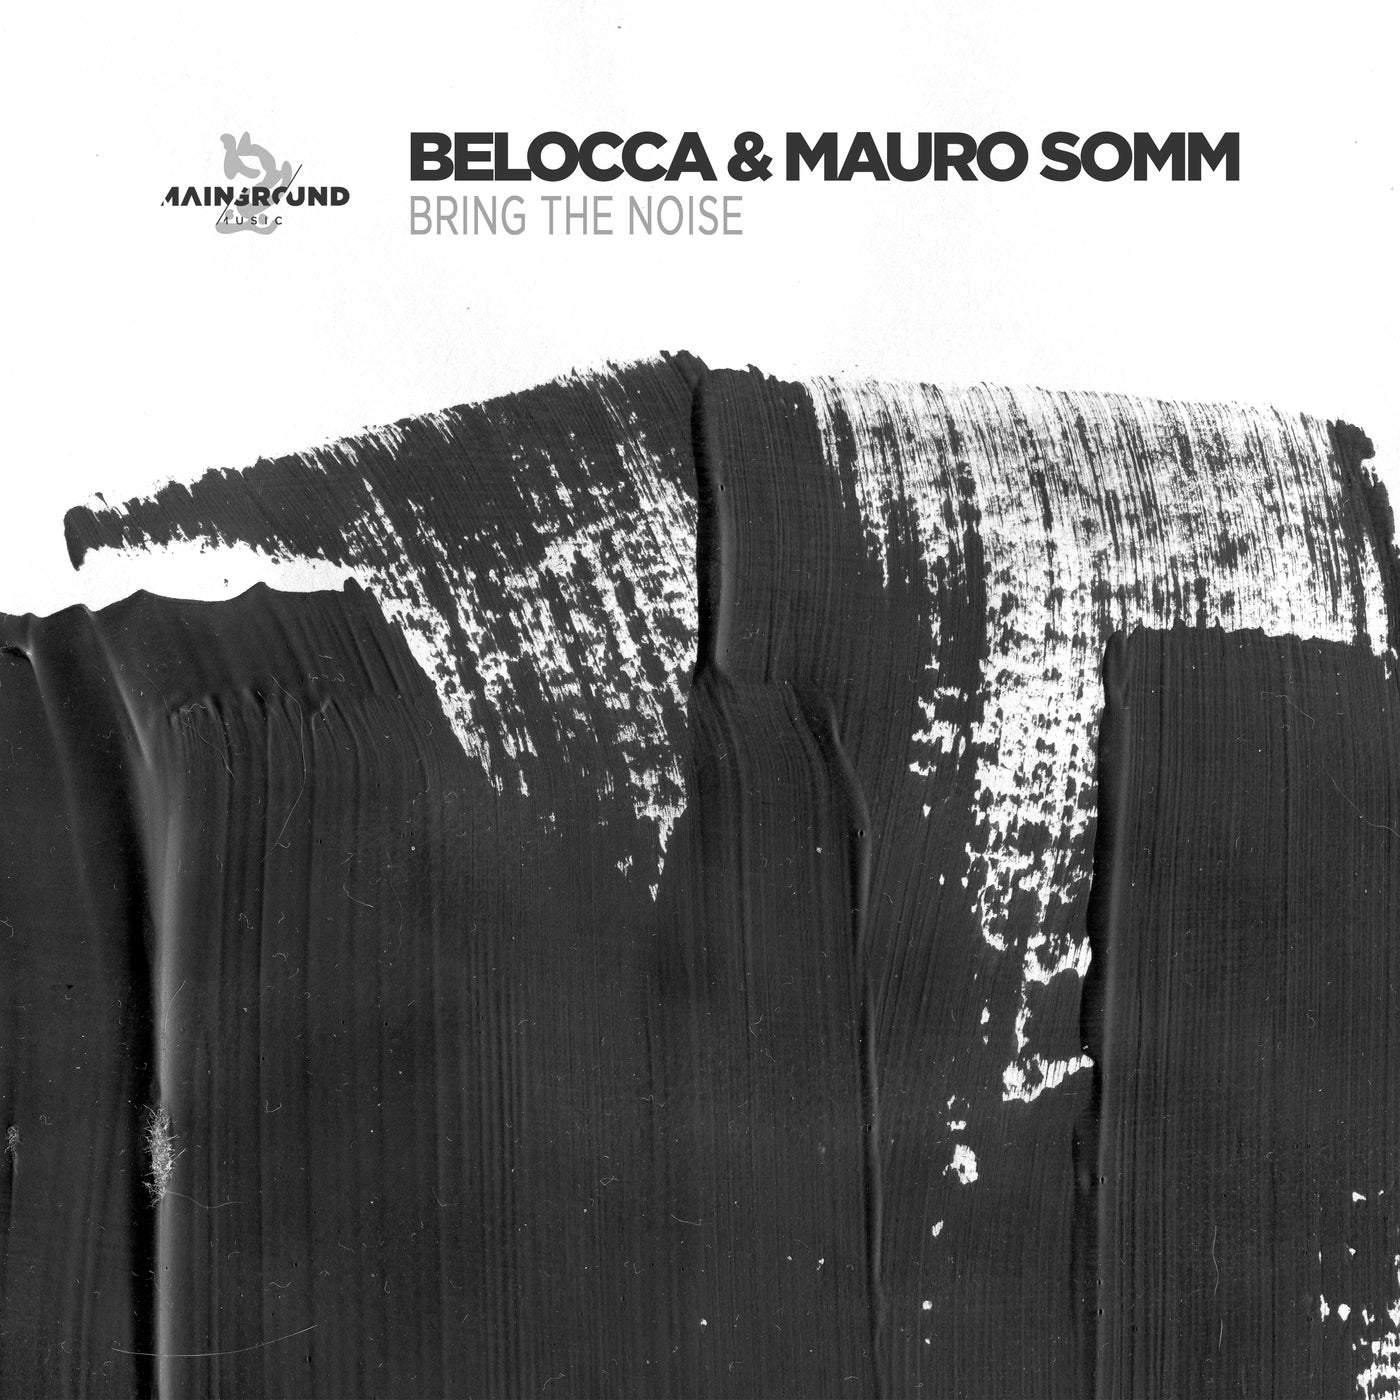 image cover: Belocca, Mauro Somm - Bring The Noise / MGM104